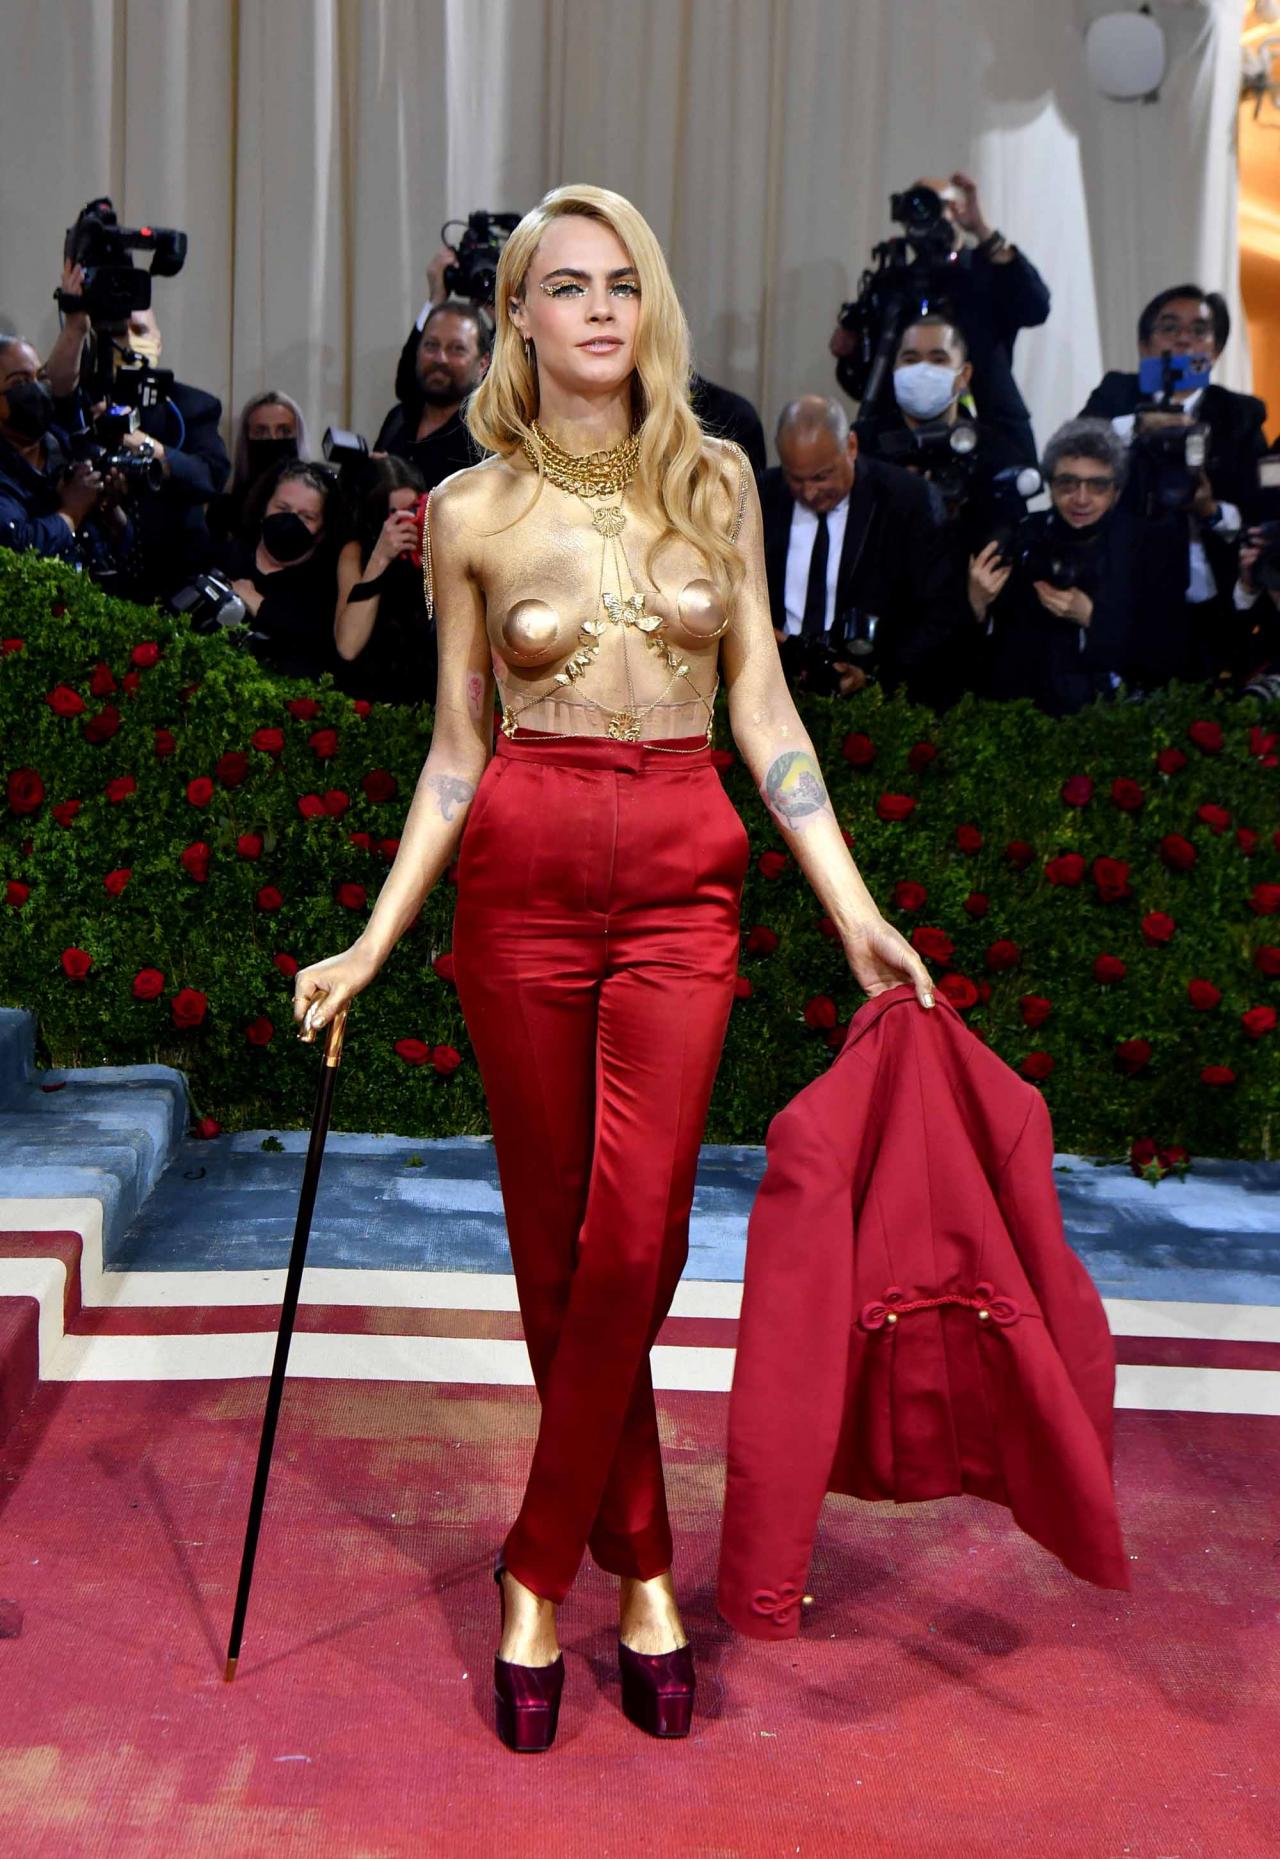 British model Cara Delevingne arrives for the 2022 Met Gala at the Metropolitan Museum of Art on May 2, 2022, in New York. - The Gala raises money for the Metropolitan Museum of Art's Costume Institute. The Gala's 2022 theme is "In America: An Anthology of Fashion". (Photo by ANGELA  WEISS / AFP)